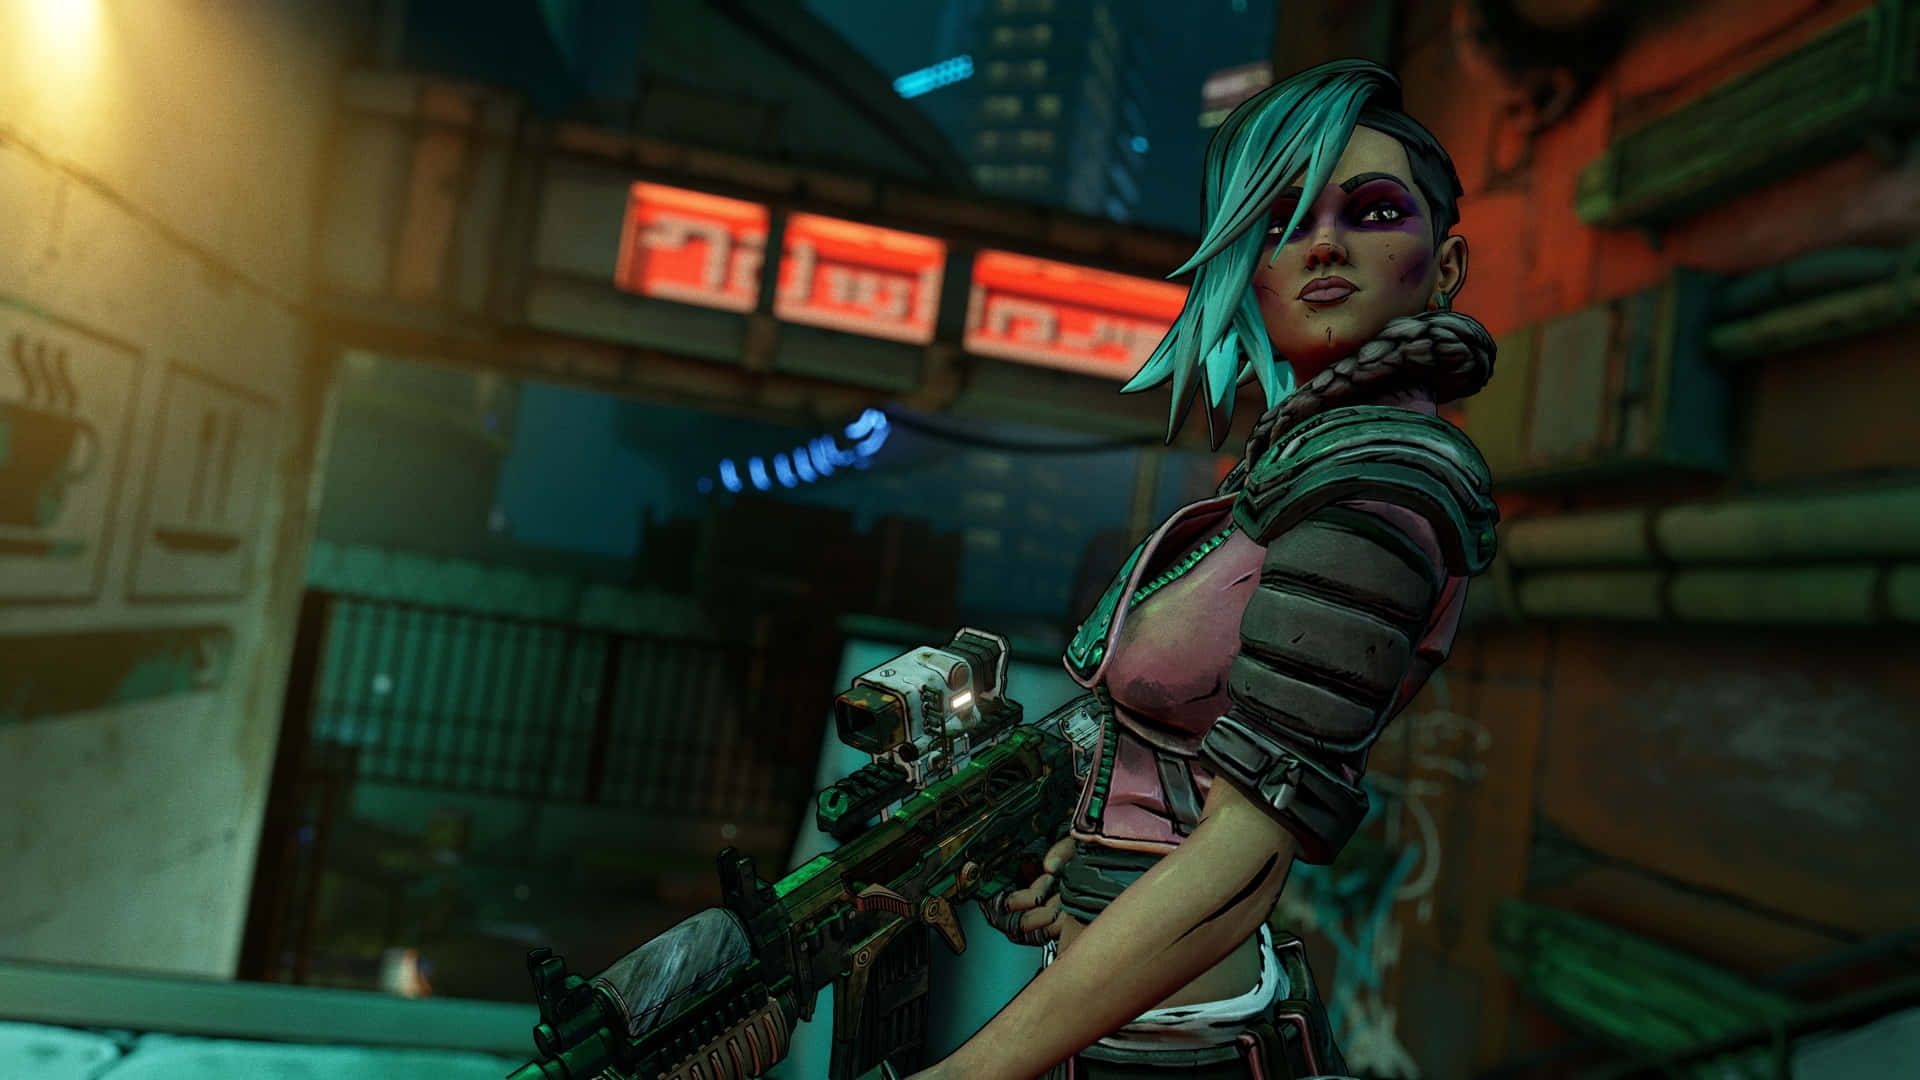 Gear Up for an Action-Packed Adventure in Borderlands 3